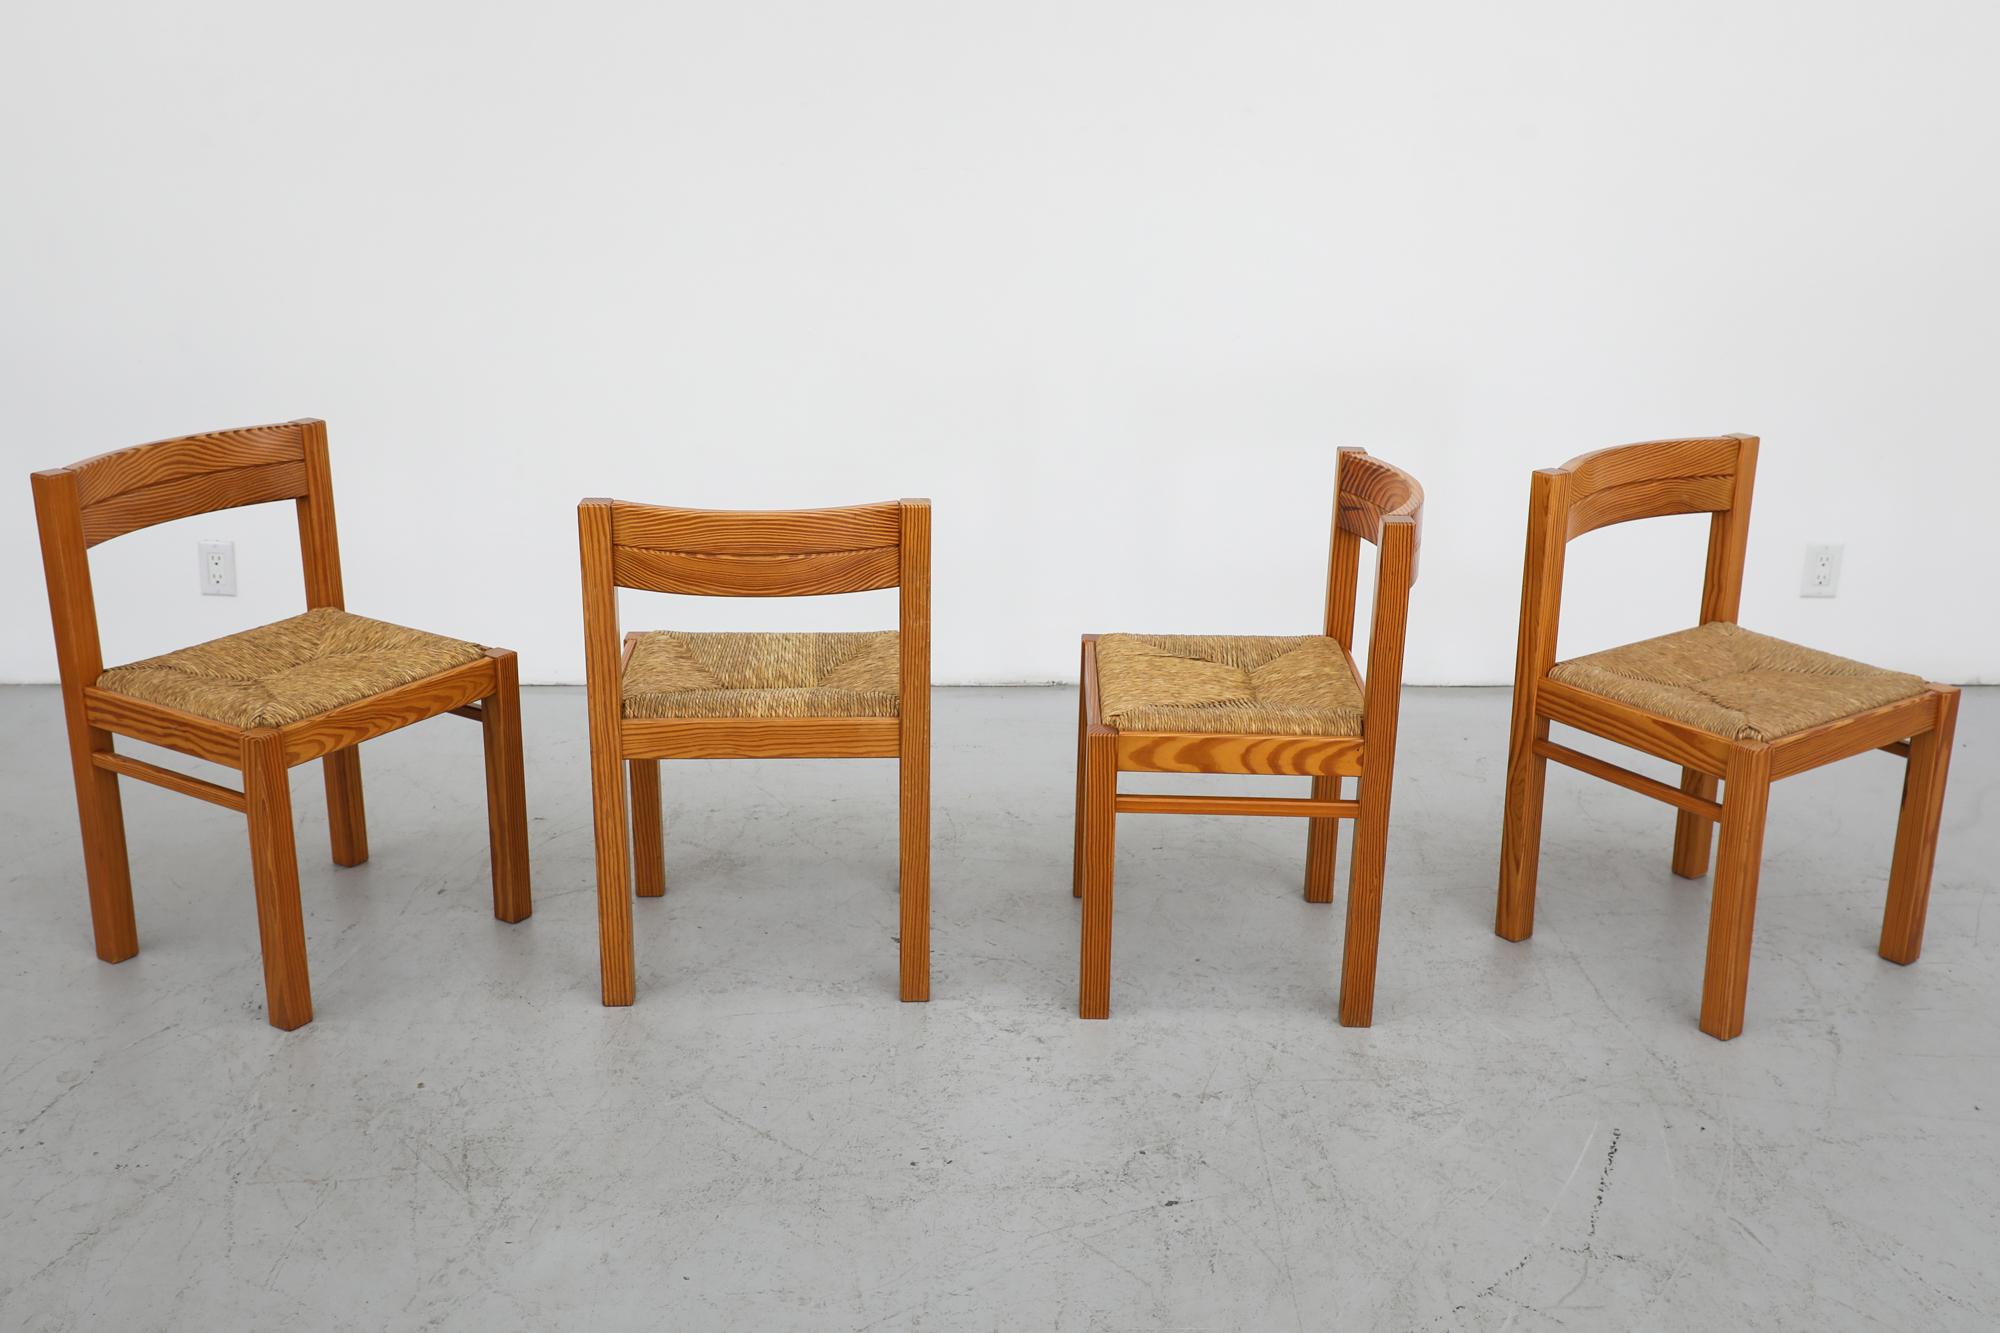 Set of 4 pine dining chairs by Dutch Mid Century icon Martin Visser for 't Spectrum with woven rush seats and a curved backrest. In original condition with visible wear to the wood frames and there may be some rush breakage. Wear is consistent with